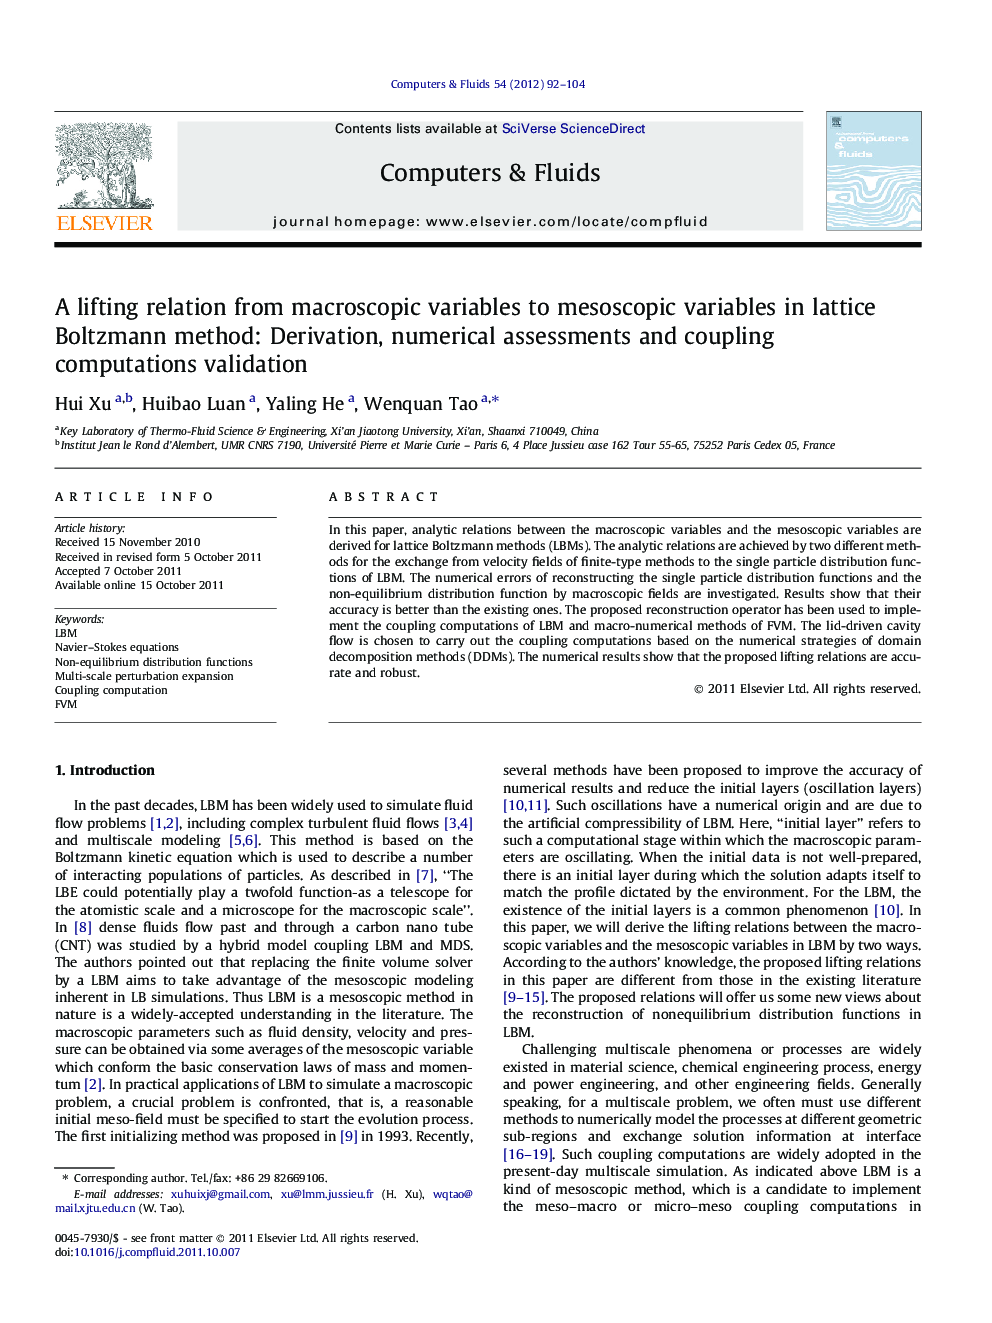 A lifting relation from macroscopic variables to mesoscopic variables in lattice Boltzmann method: Derivation, numerical assessments and coupling computations validation